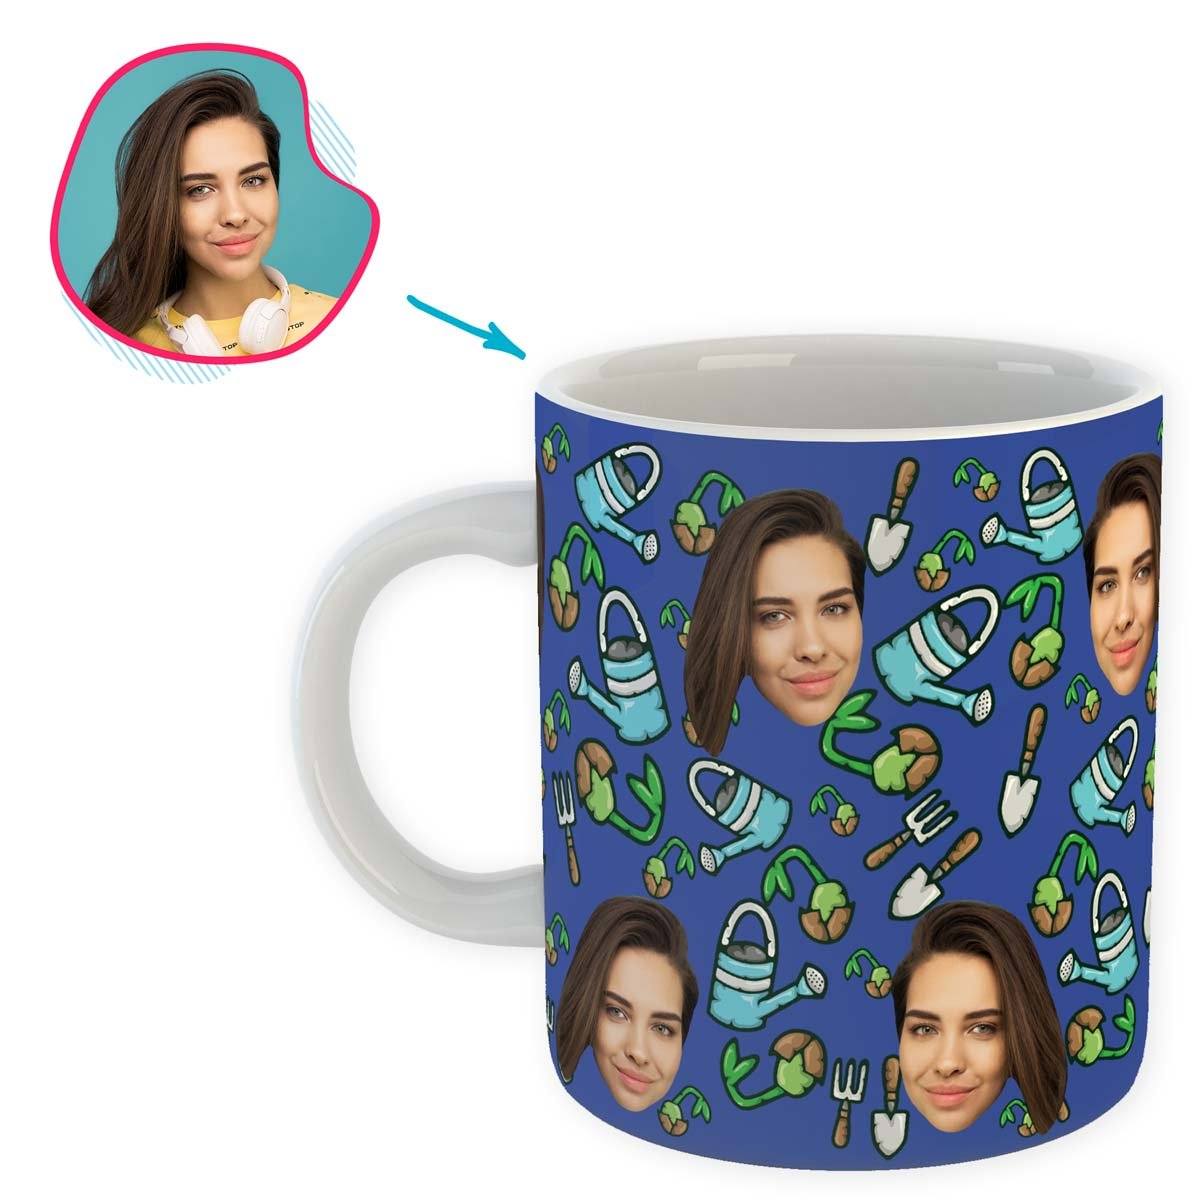 darkblue Gardening mug personalized with photo of face printed on it